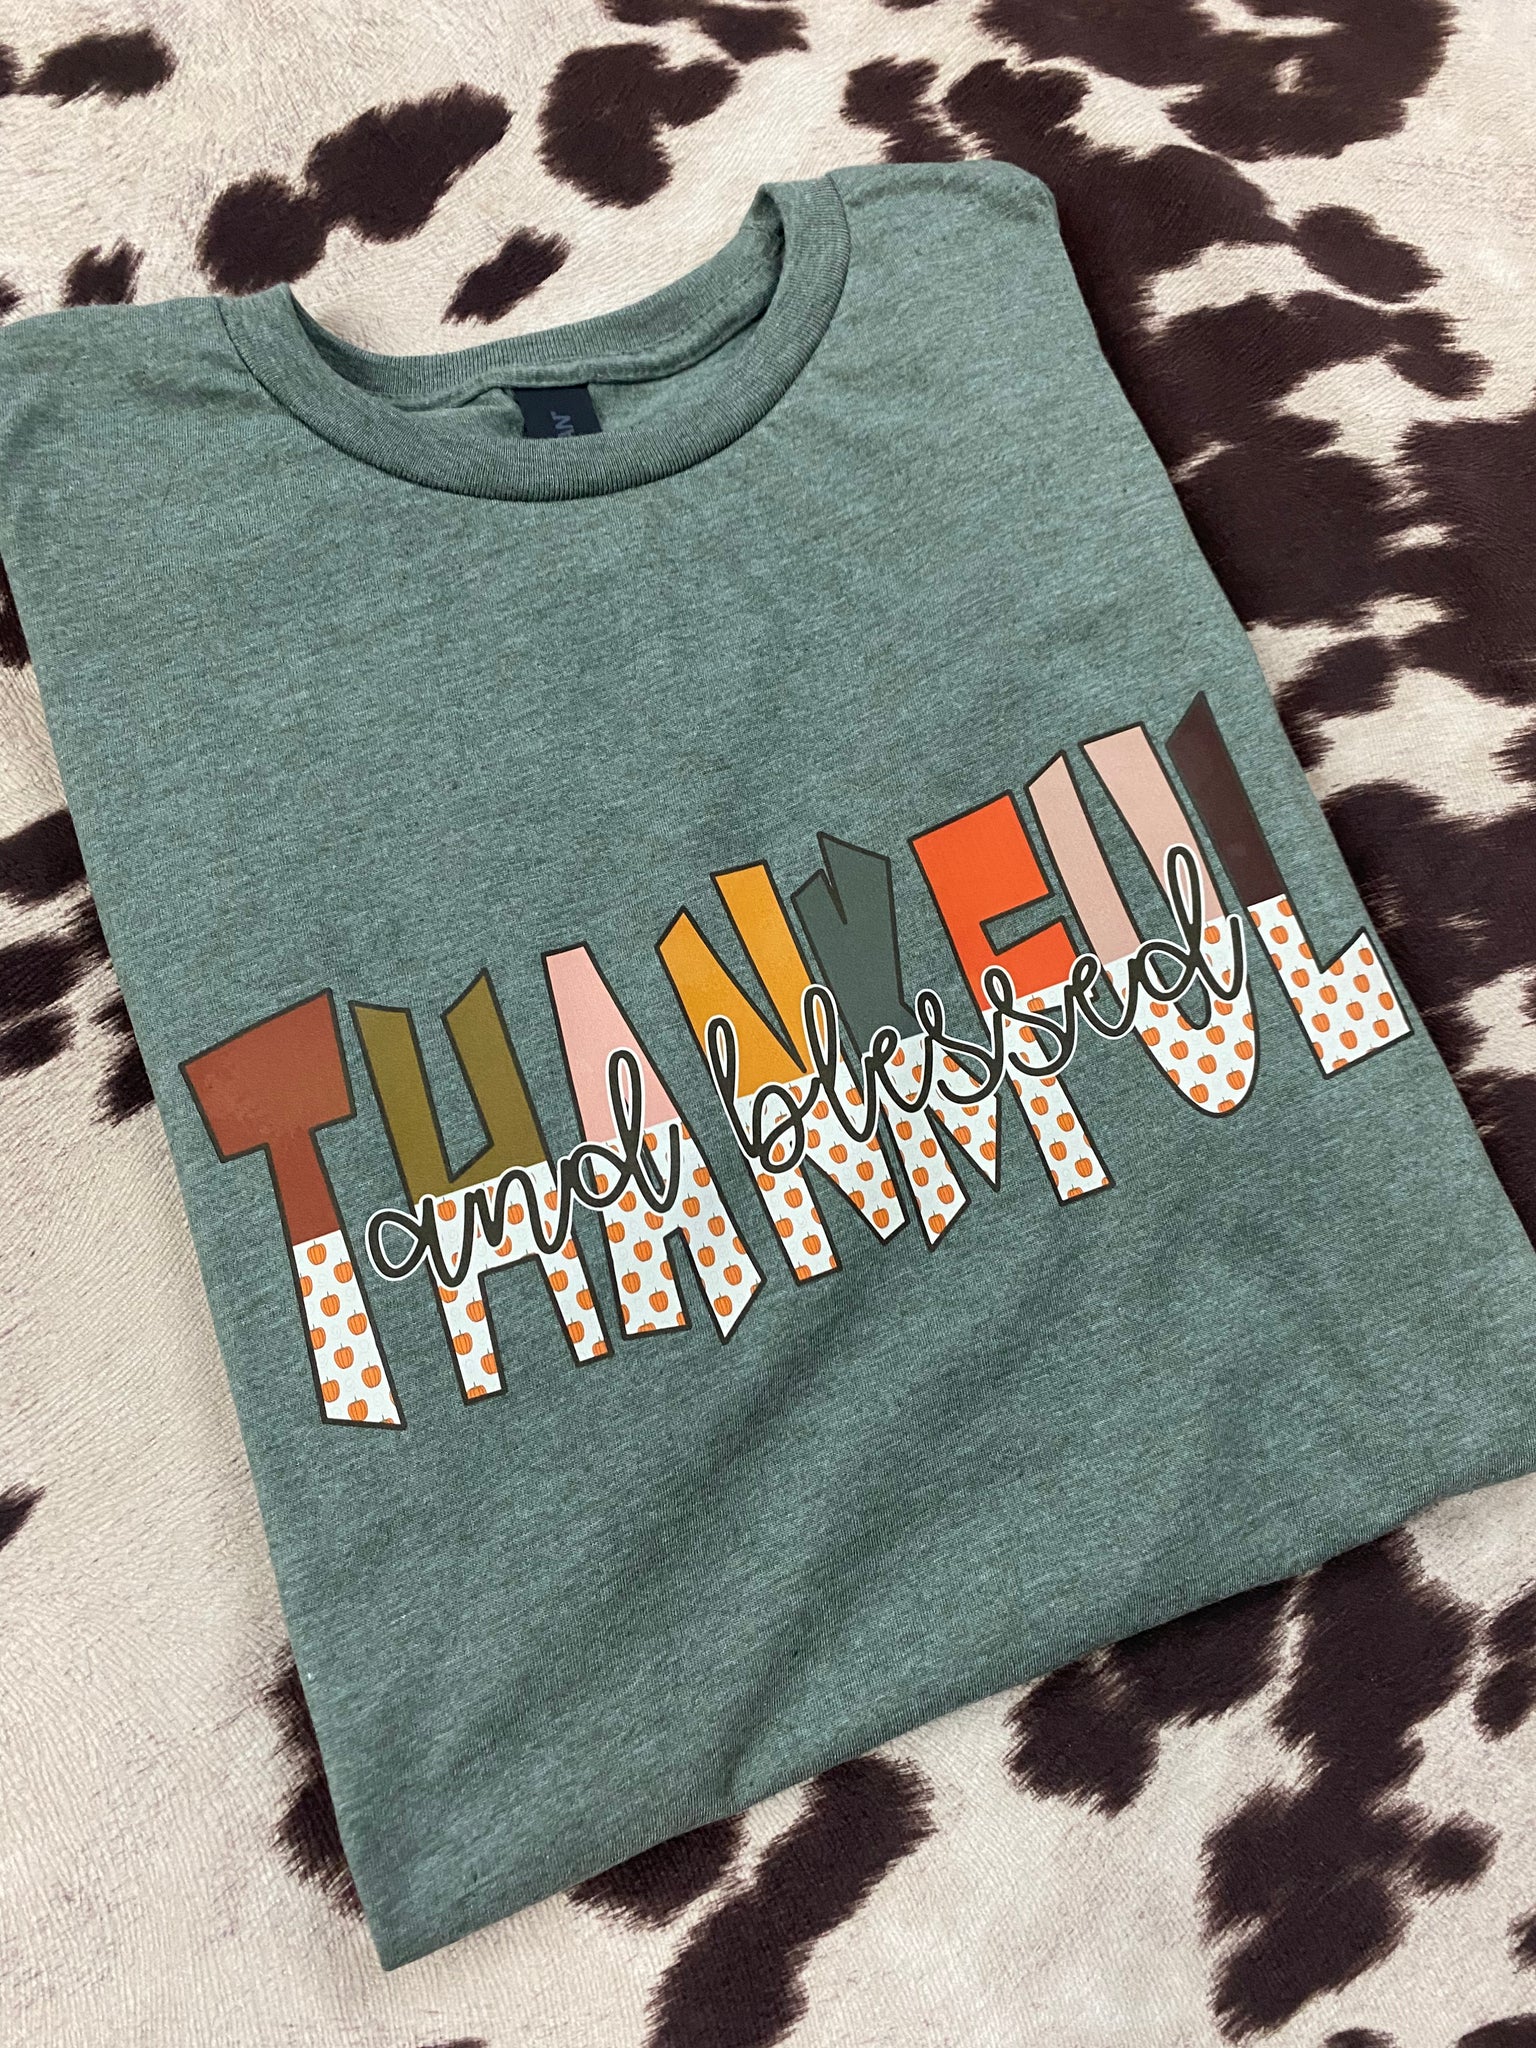 Thankful & Blessed T-shirt